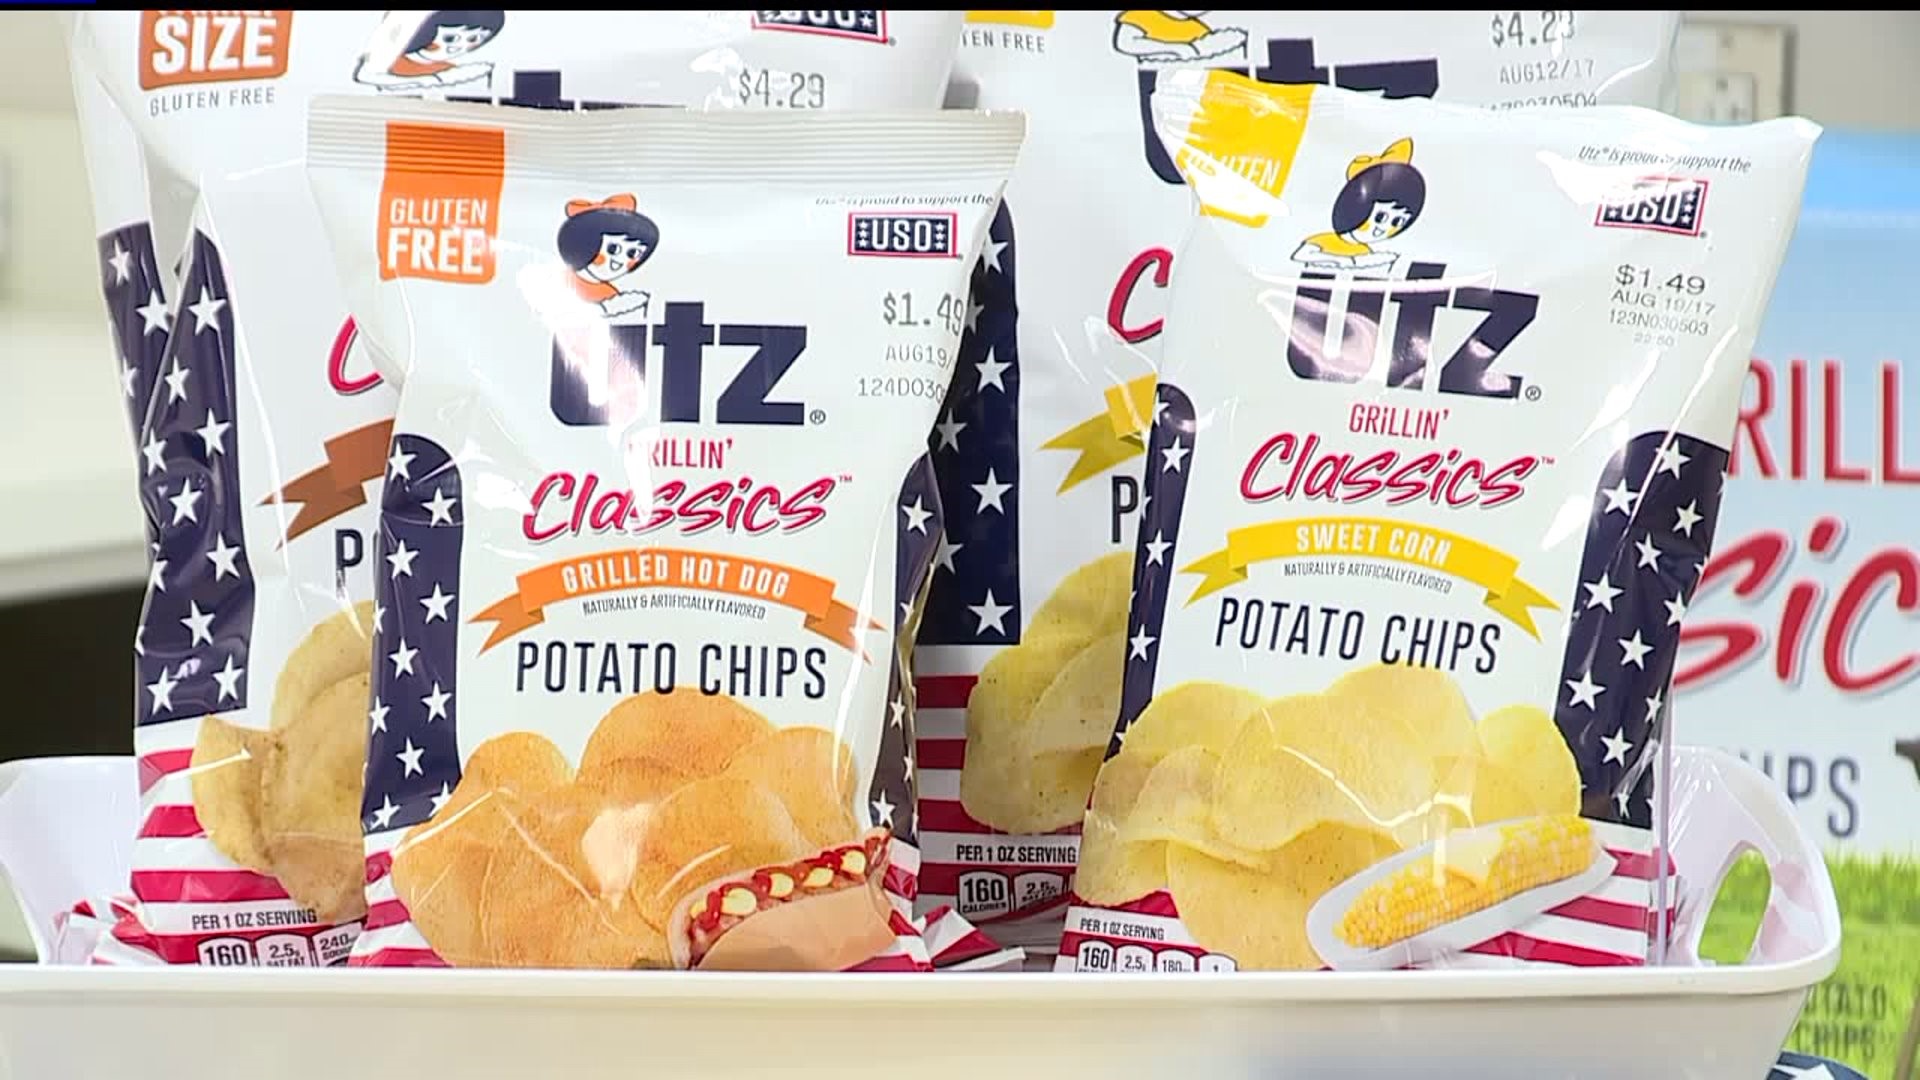 Checking out Utz snack foods, a Hanover staple!